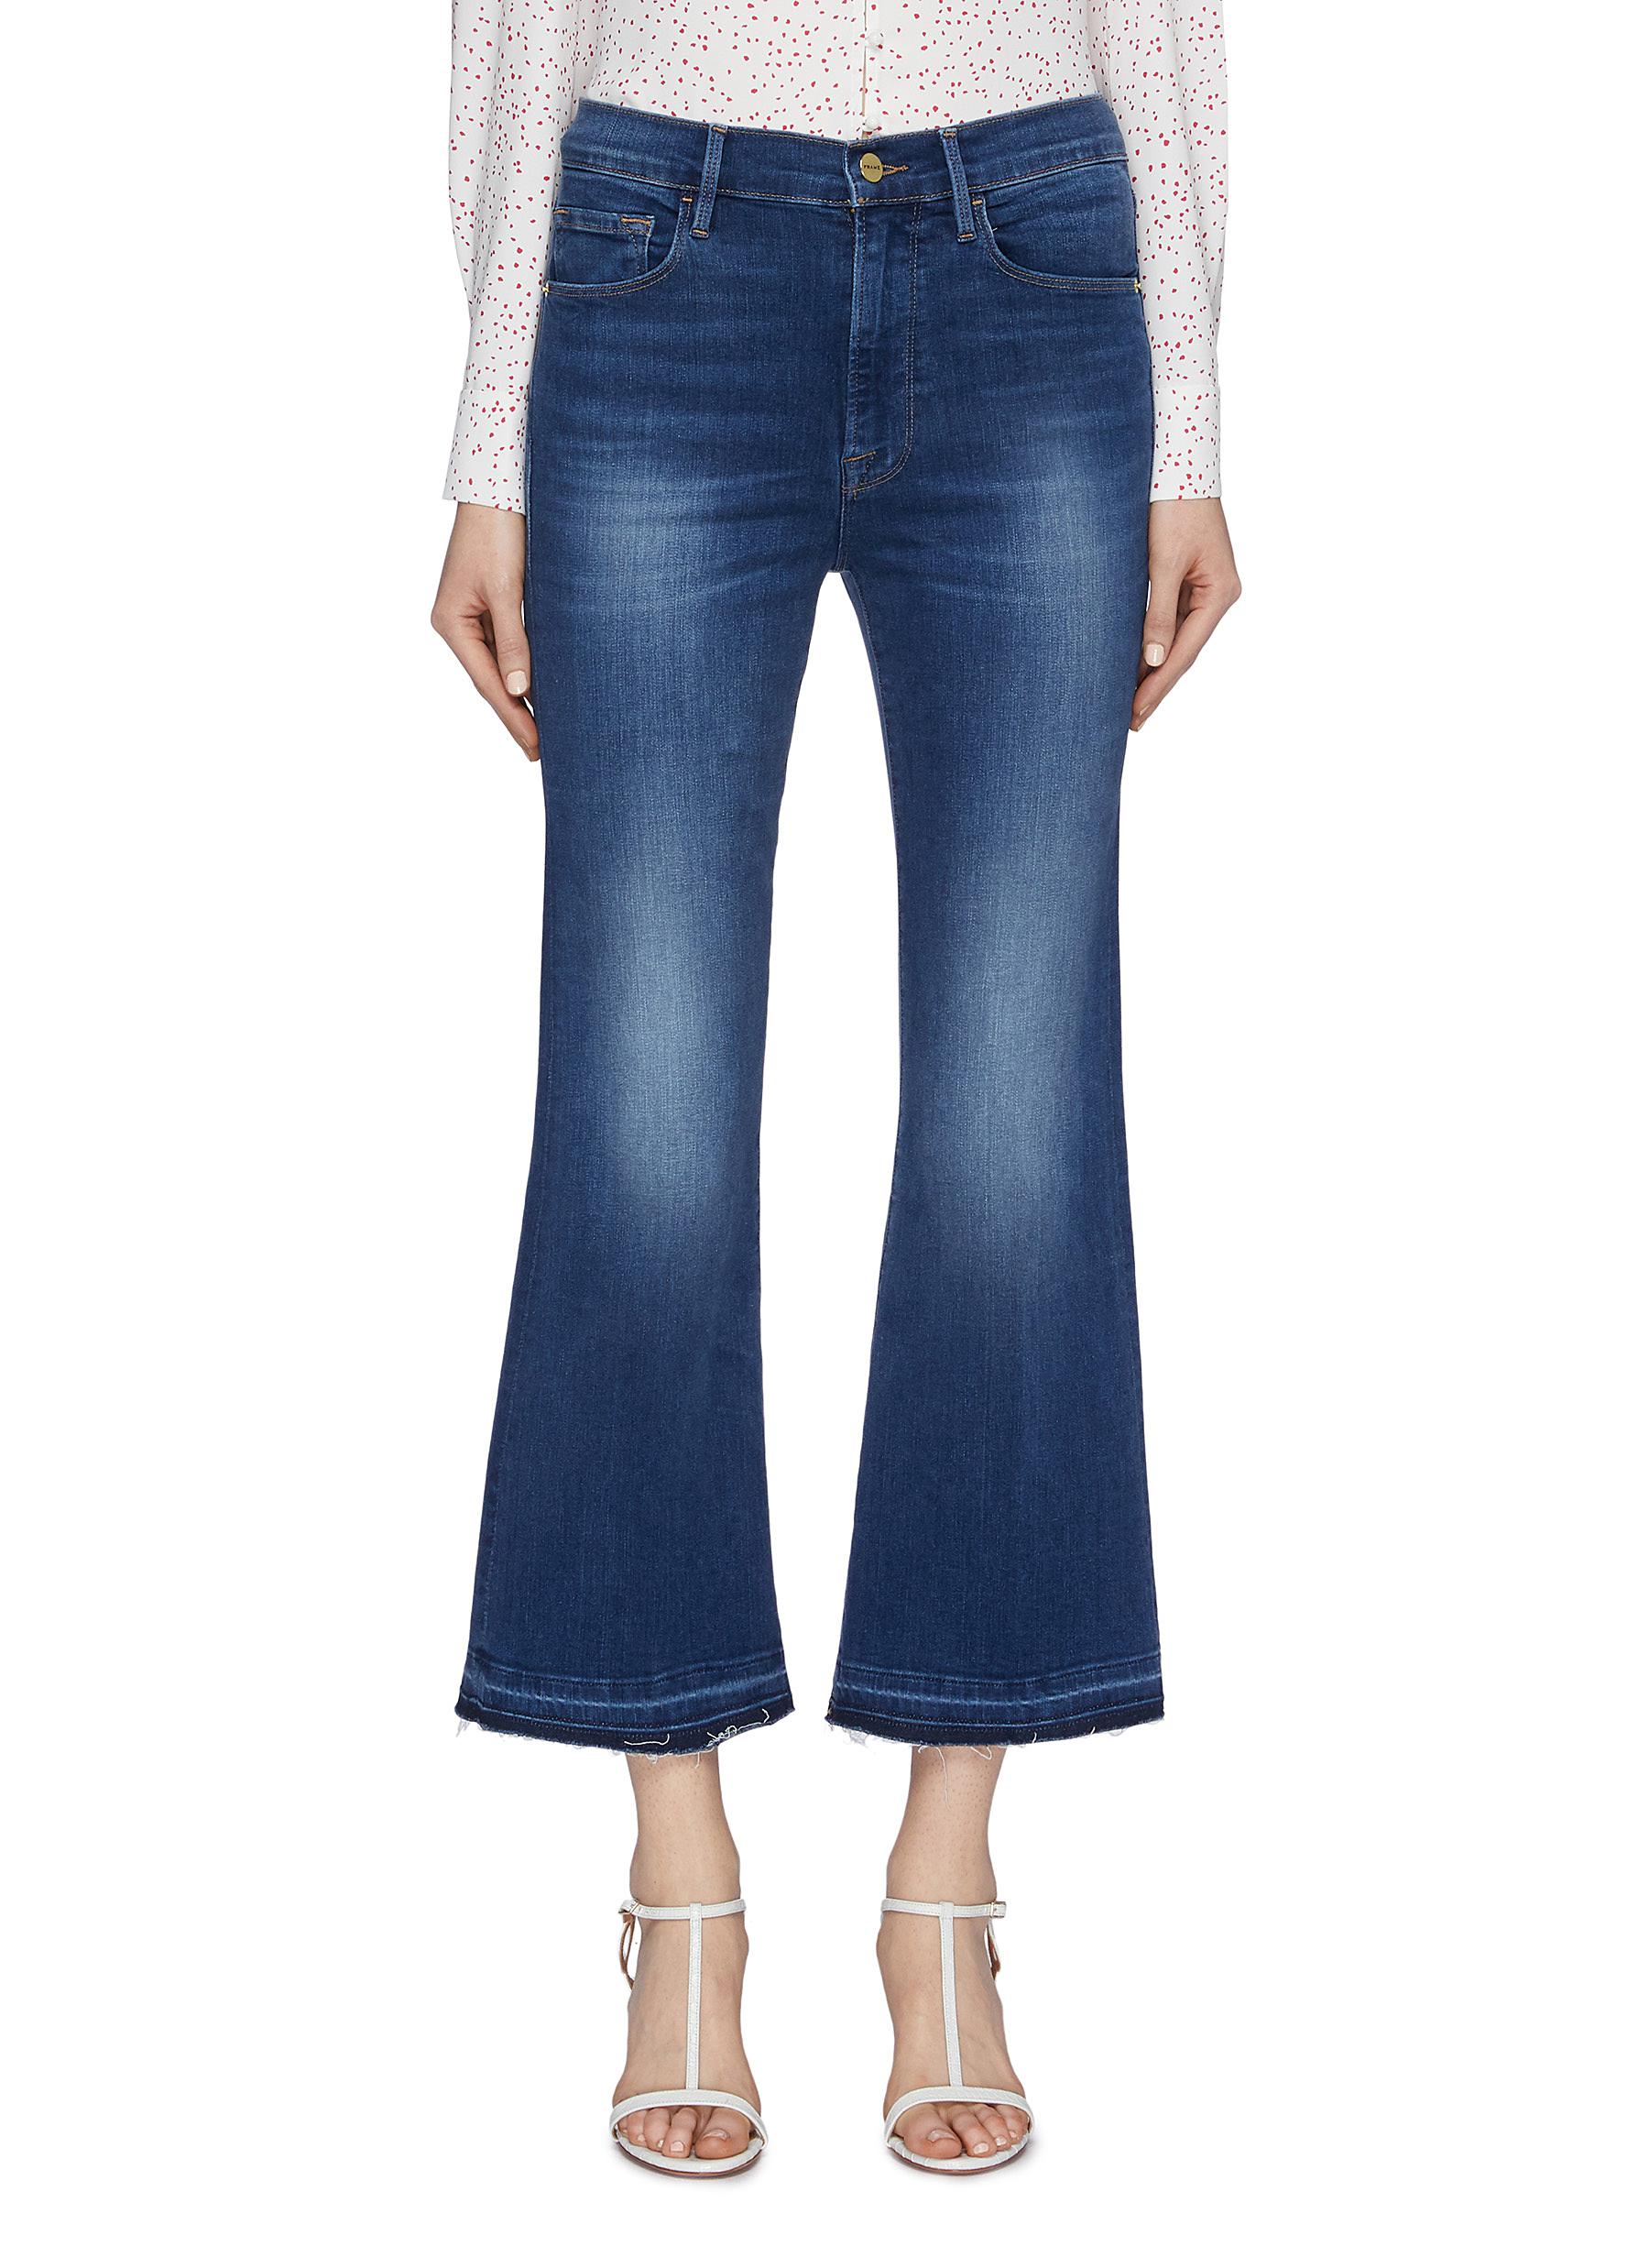 Le Crop Flare jeans by Frame Denim